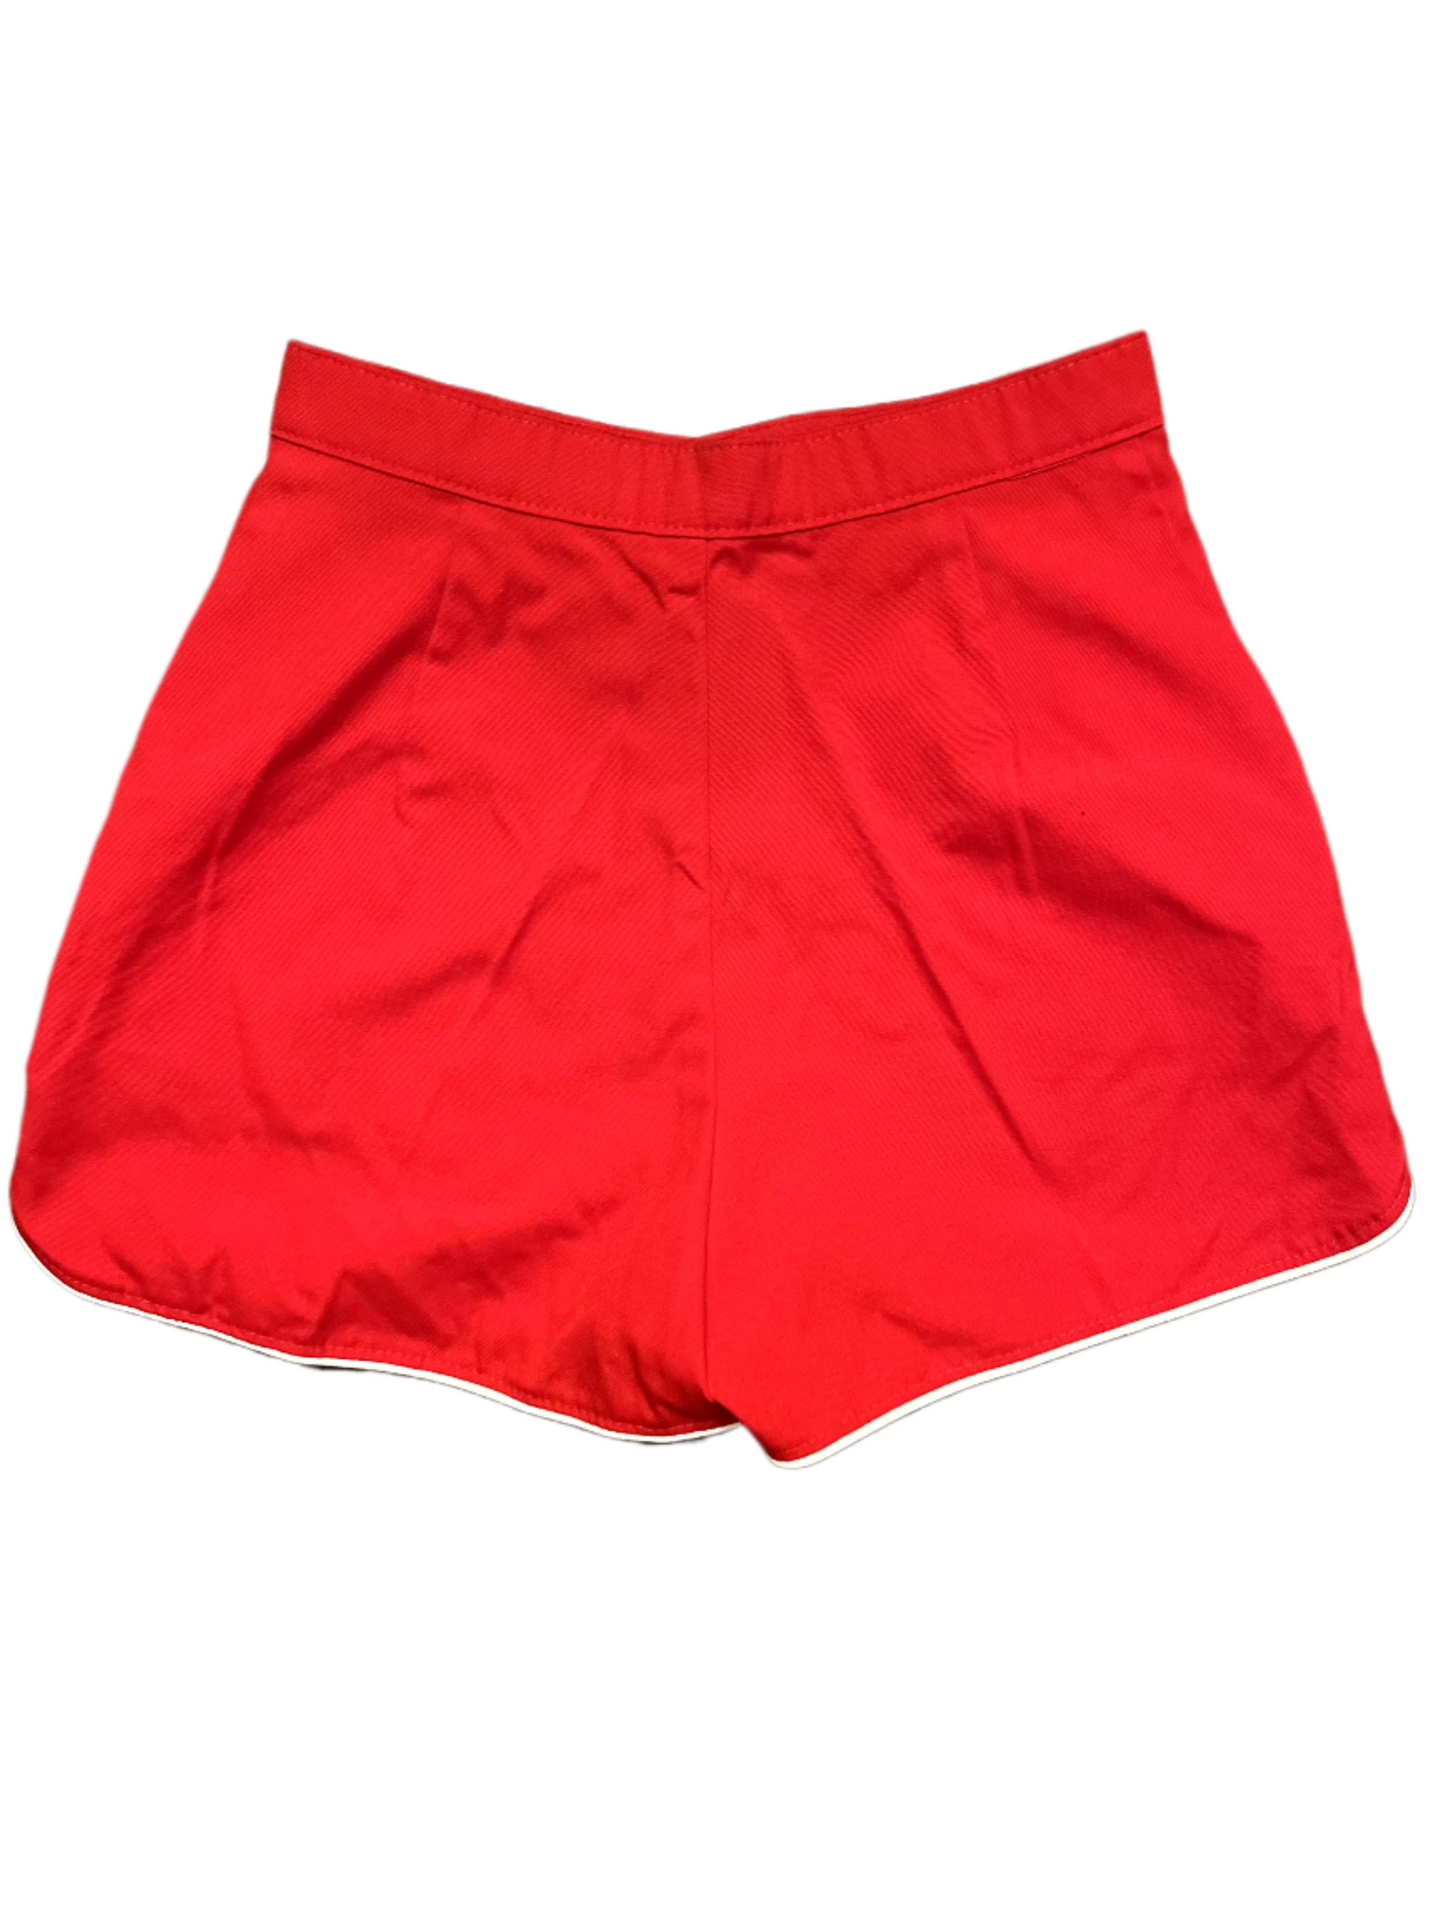 Back of vintage red shorts with white stripe on white background.